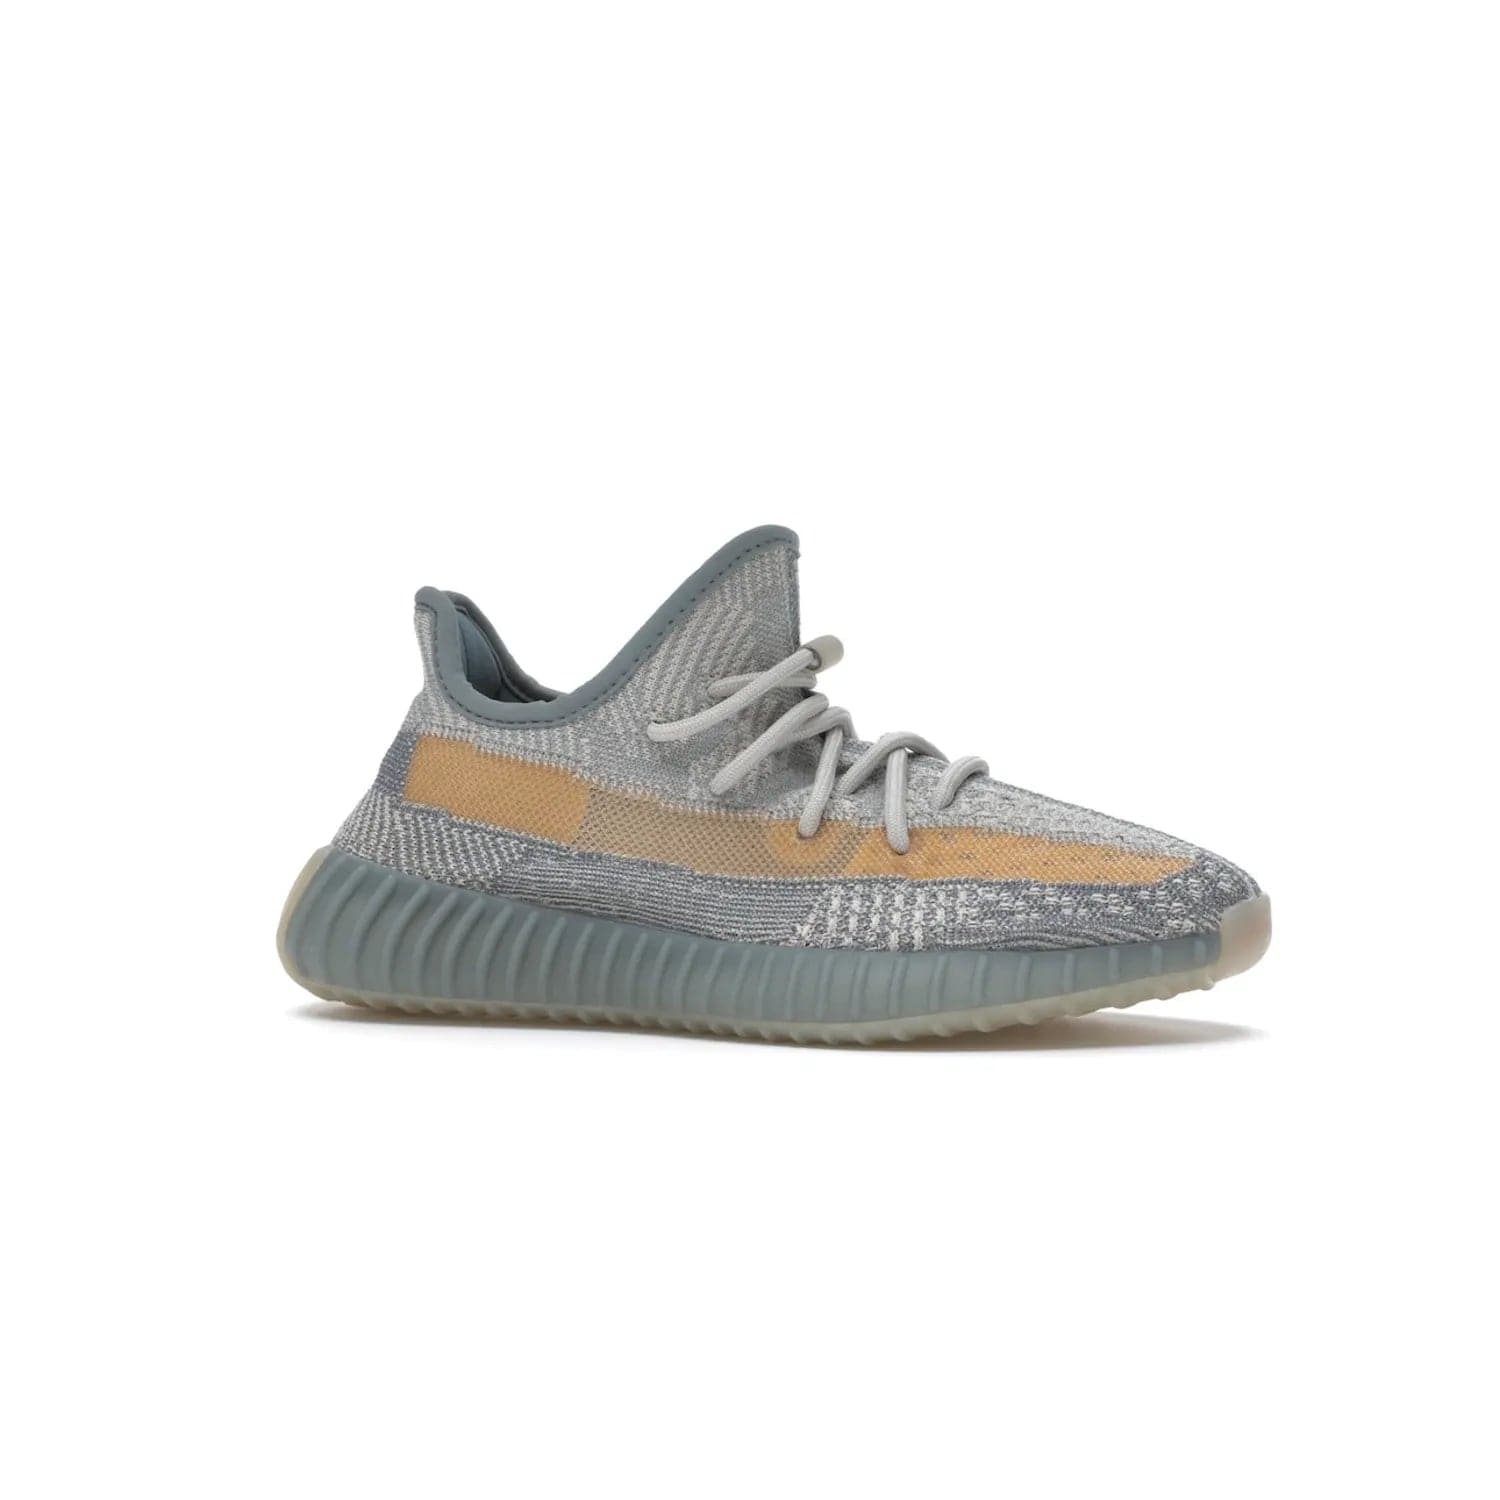 adidas Yeezy Boost 350 V2 Israfil - Image 3 - Only at www.BallersClubKickz.com - The adidas Yeezy Boost 350 V2 Israfil provides a unique style with a triple colorway and multi-colored threads. Featuring BOOST cushioning in a translucent midsole, this must-have sneaker drops in August 2020.